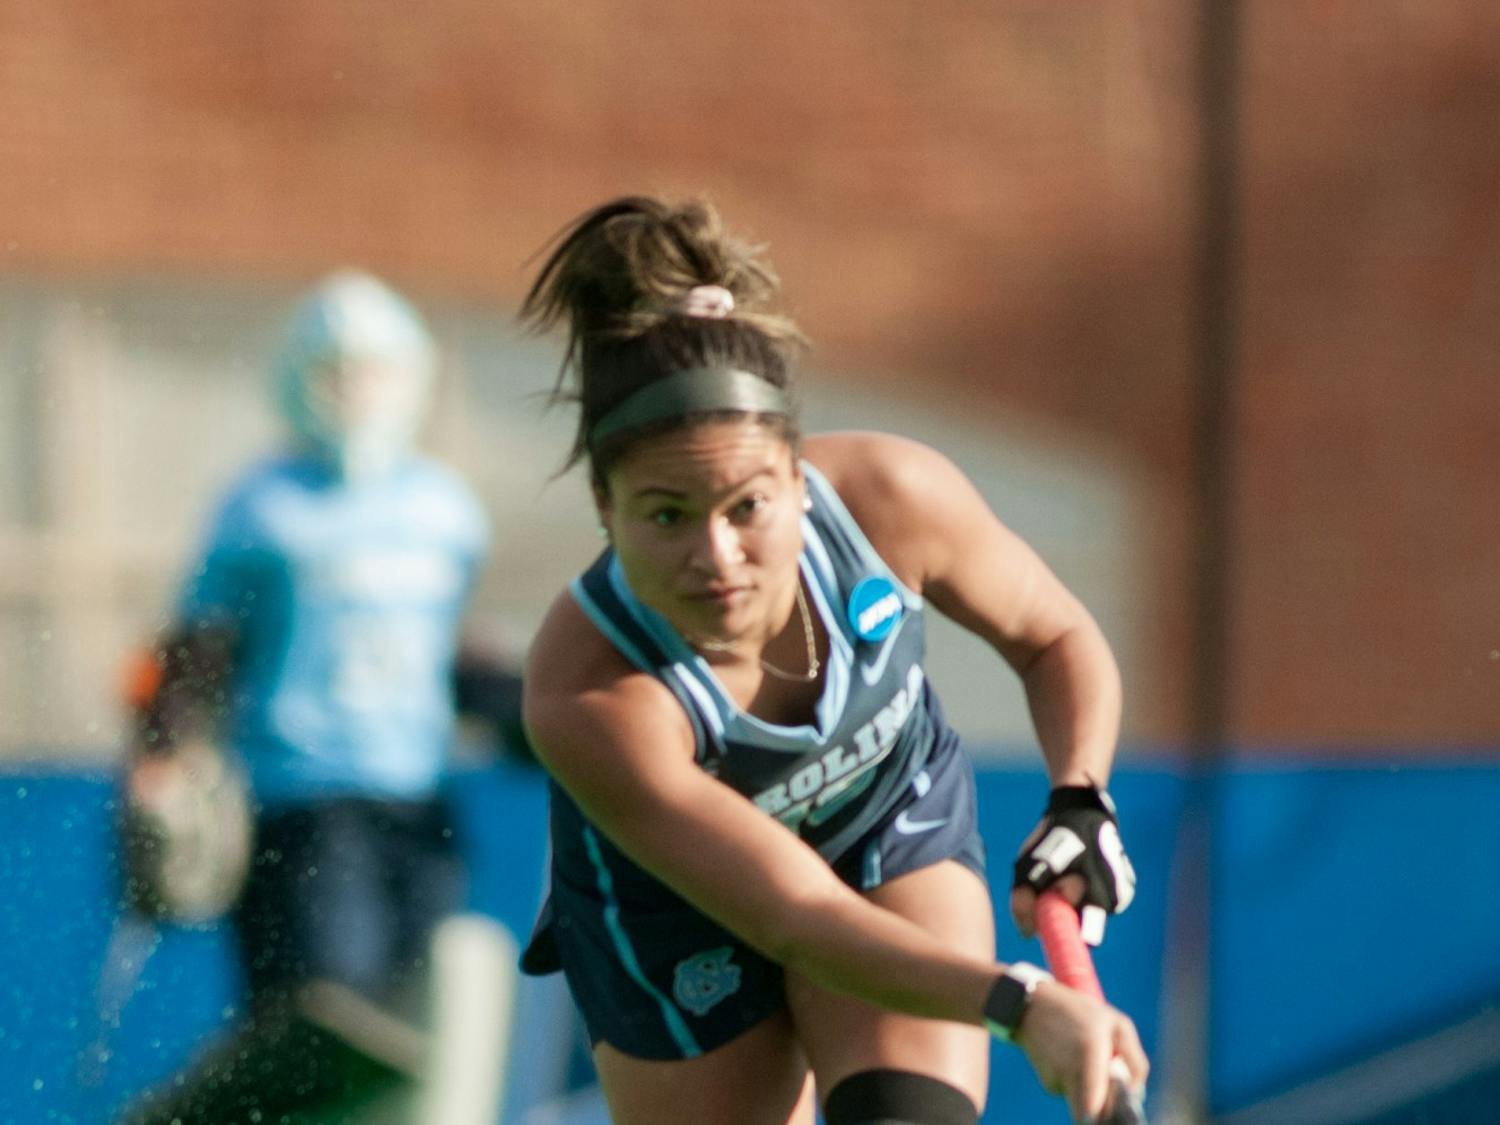 Junior back Courtnie Williamson (25) passes the ball during the NCAA Championship Game against Princeton University at Kentner Stadium on Sunday, Nov. 24, 2019. UNC won 6-1, marking their 8th national championship.